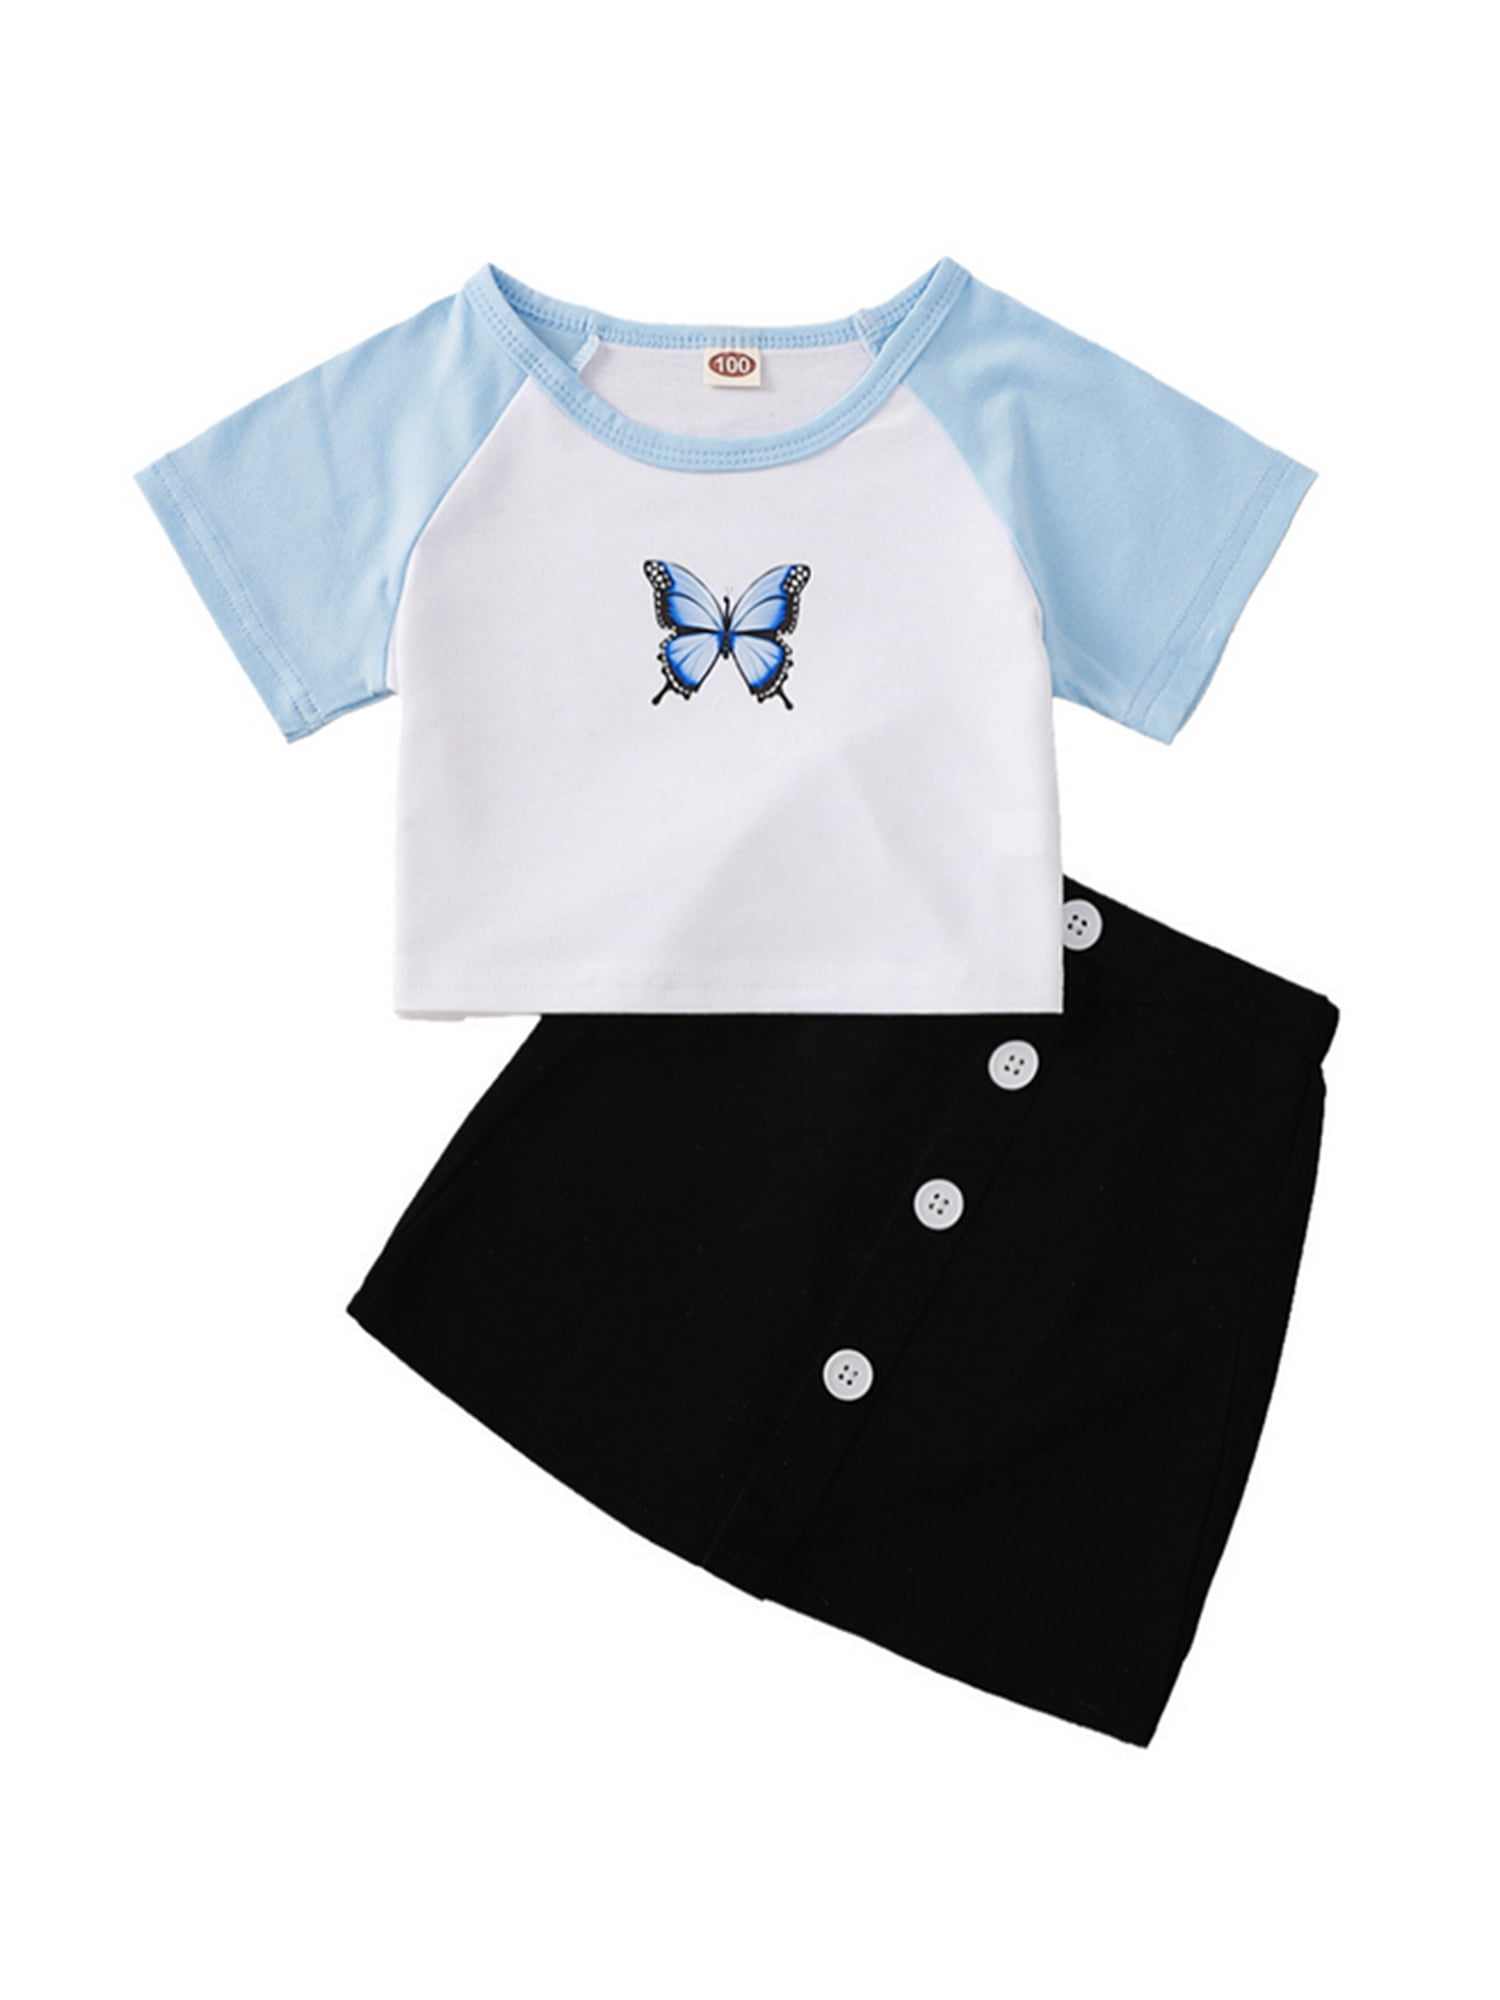 Efaster 2PCS Kids Baby Girl Denim T-Shirt Tops Butterfly Lace Skirt Set 1-5 Years 